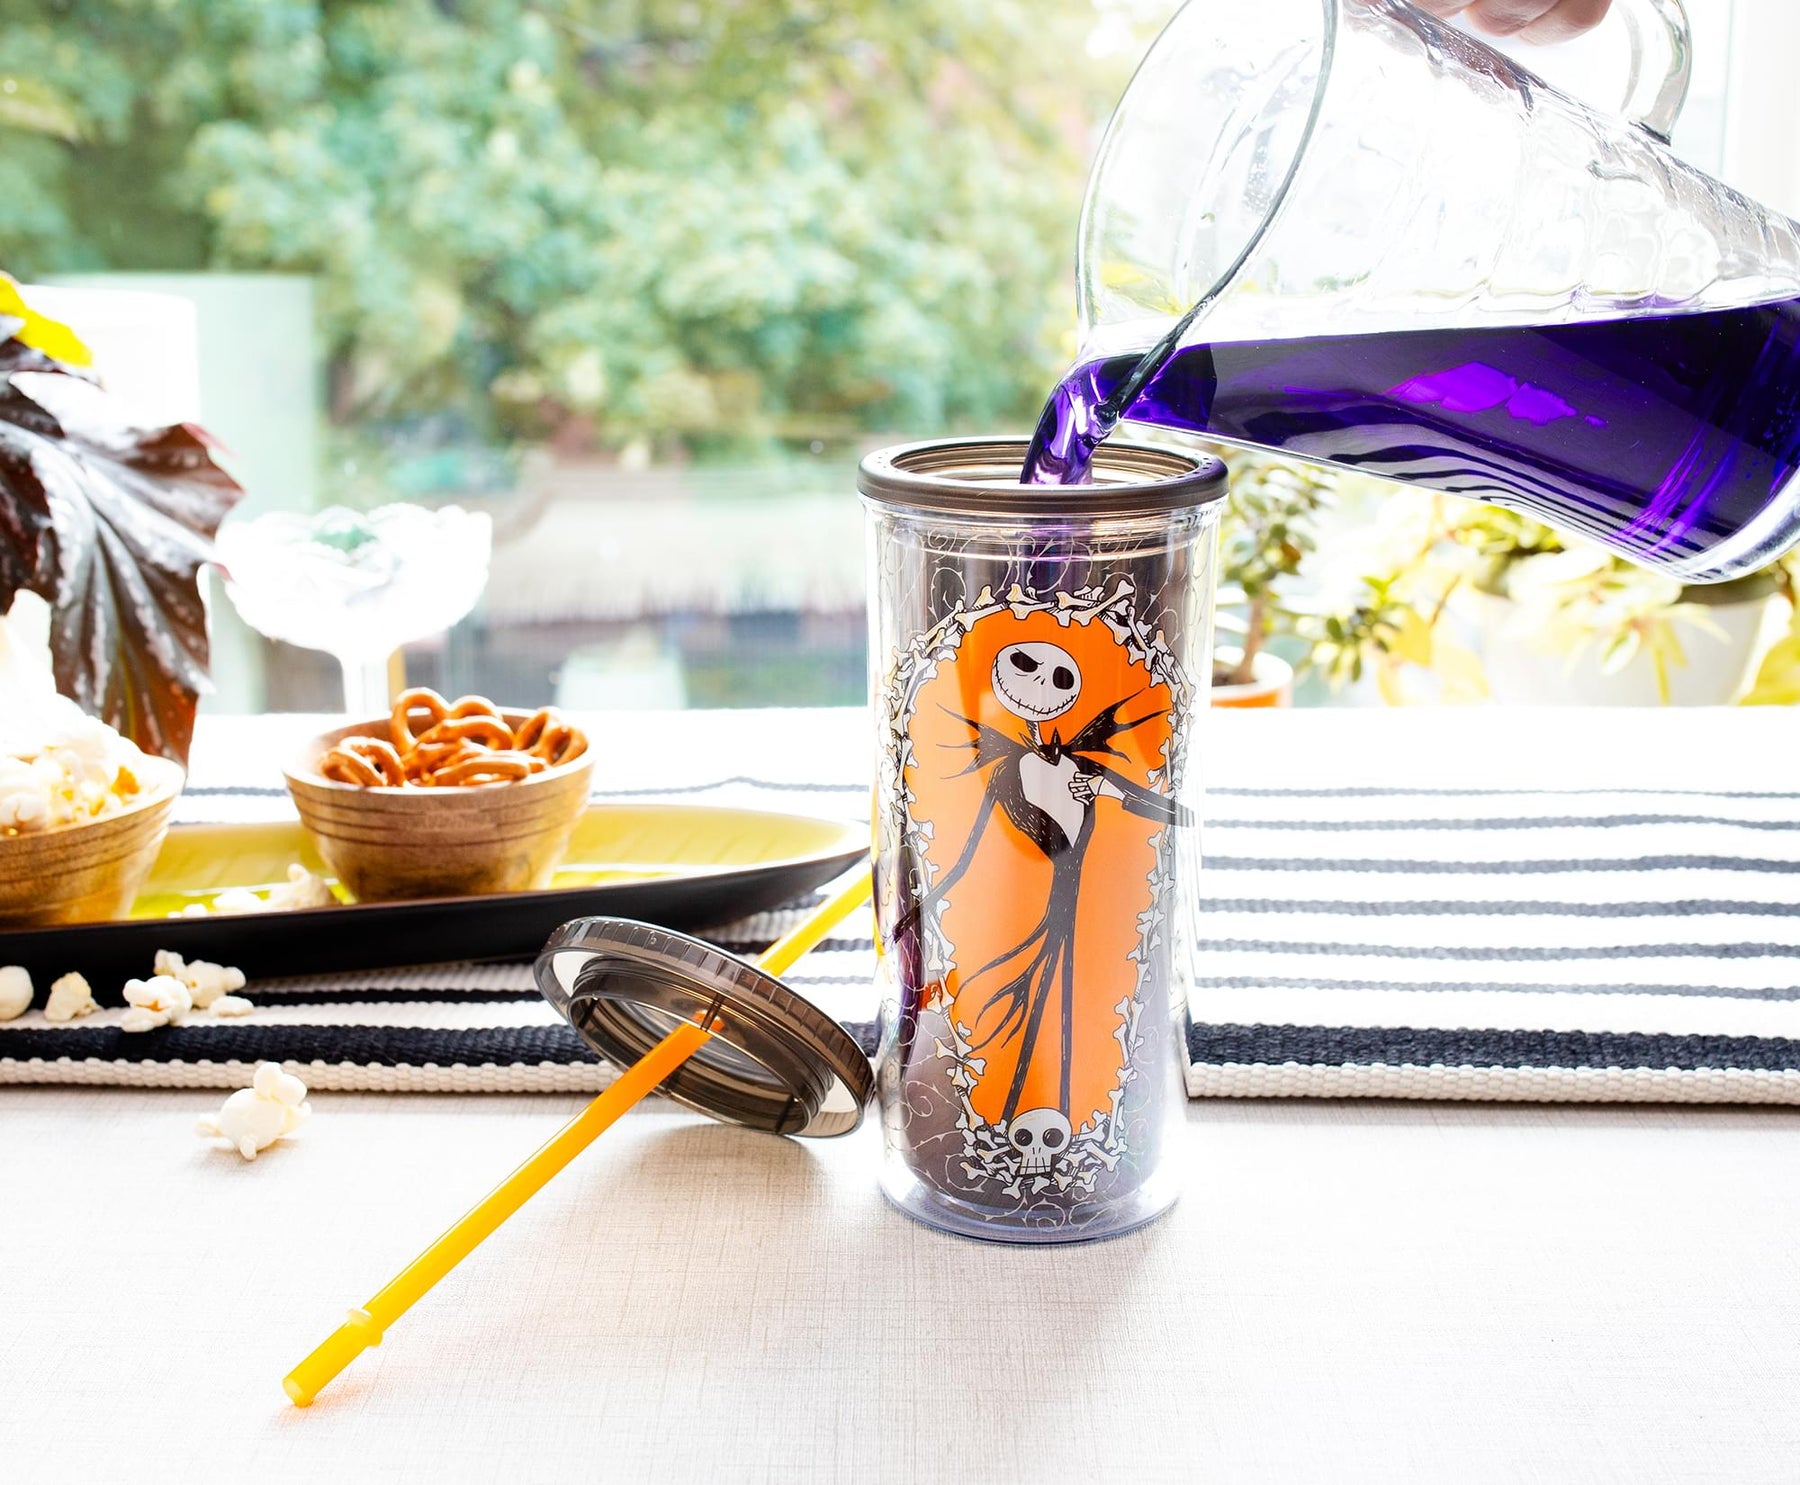 Nightmare Before Christmas Jack Skellington Carnival Cup With Straw 20  Ounces